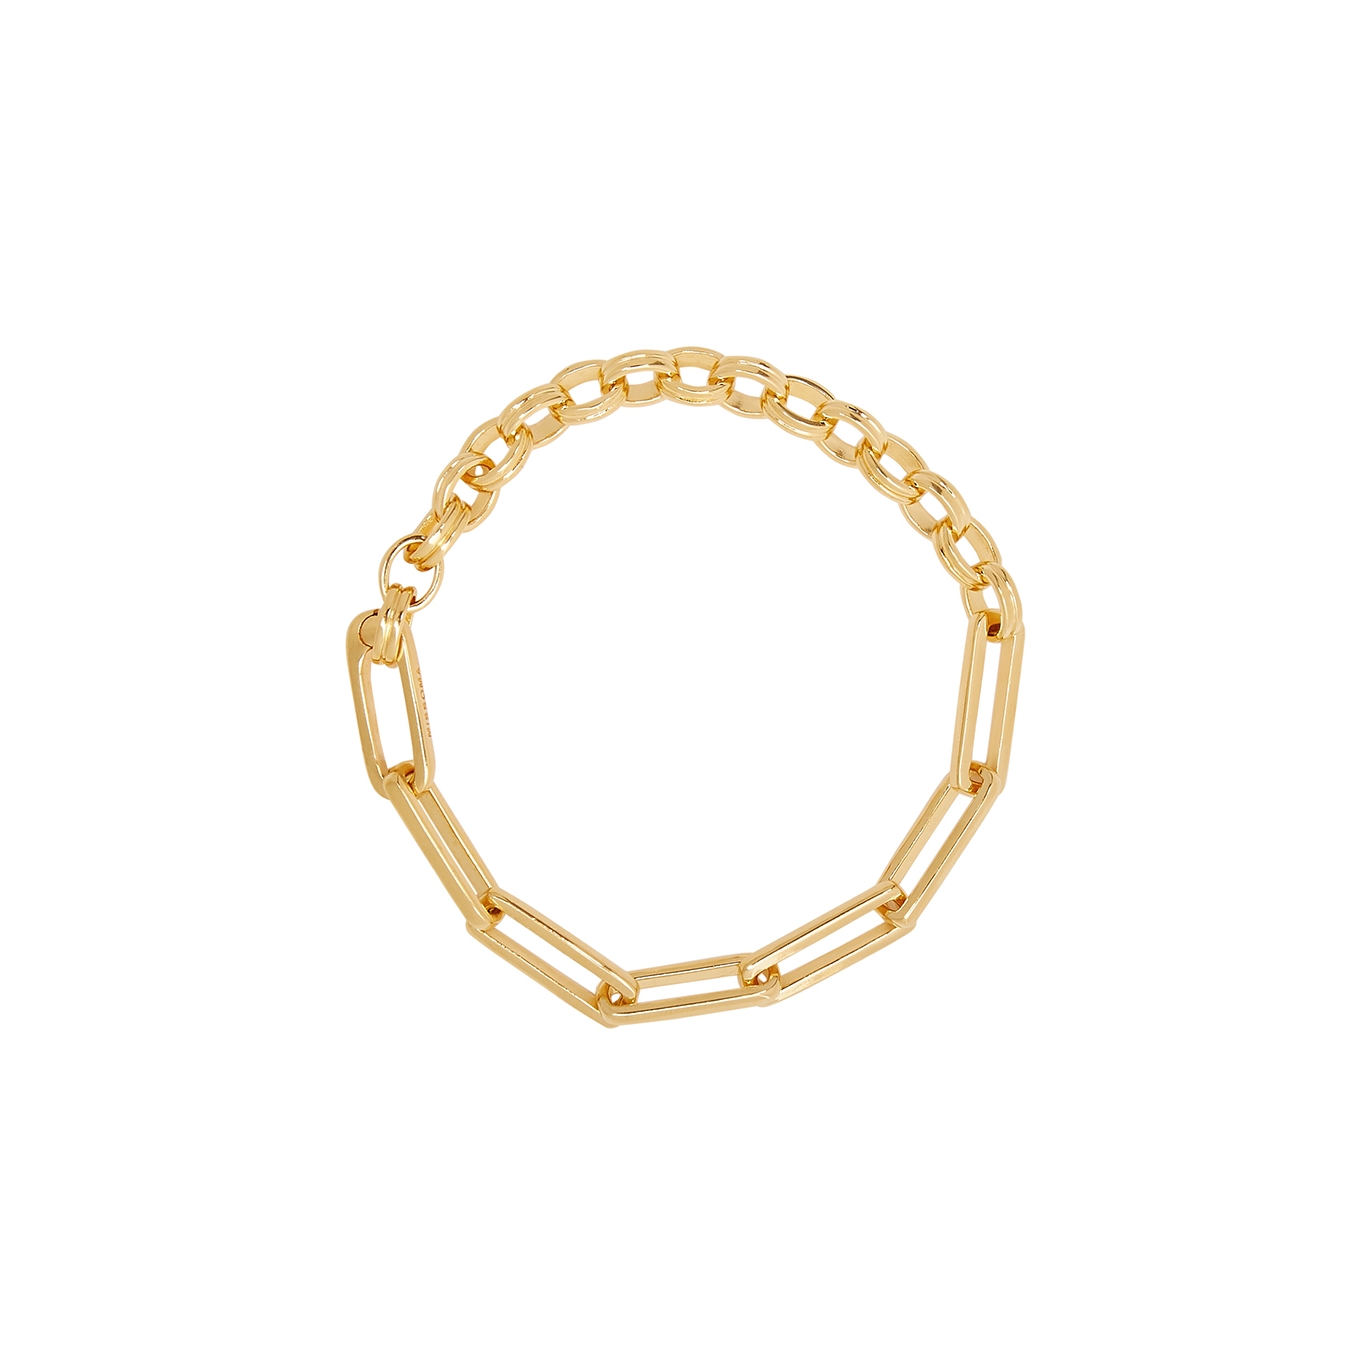 Missoma Deconstructed Axiom 18kt gold-plated chain bracelet - Harvey